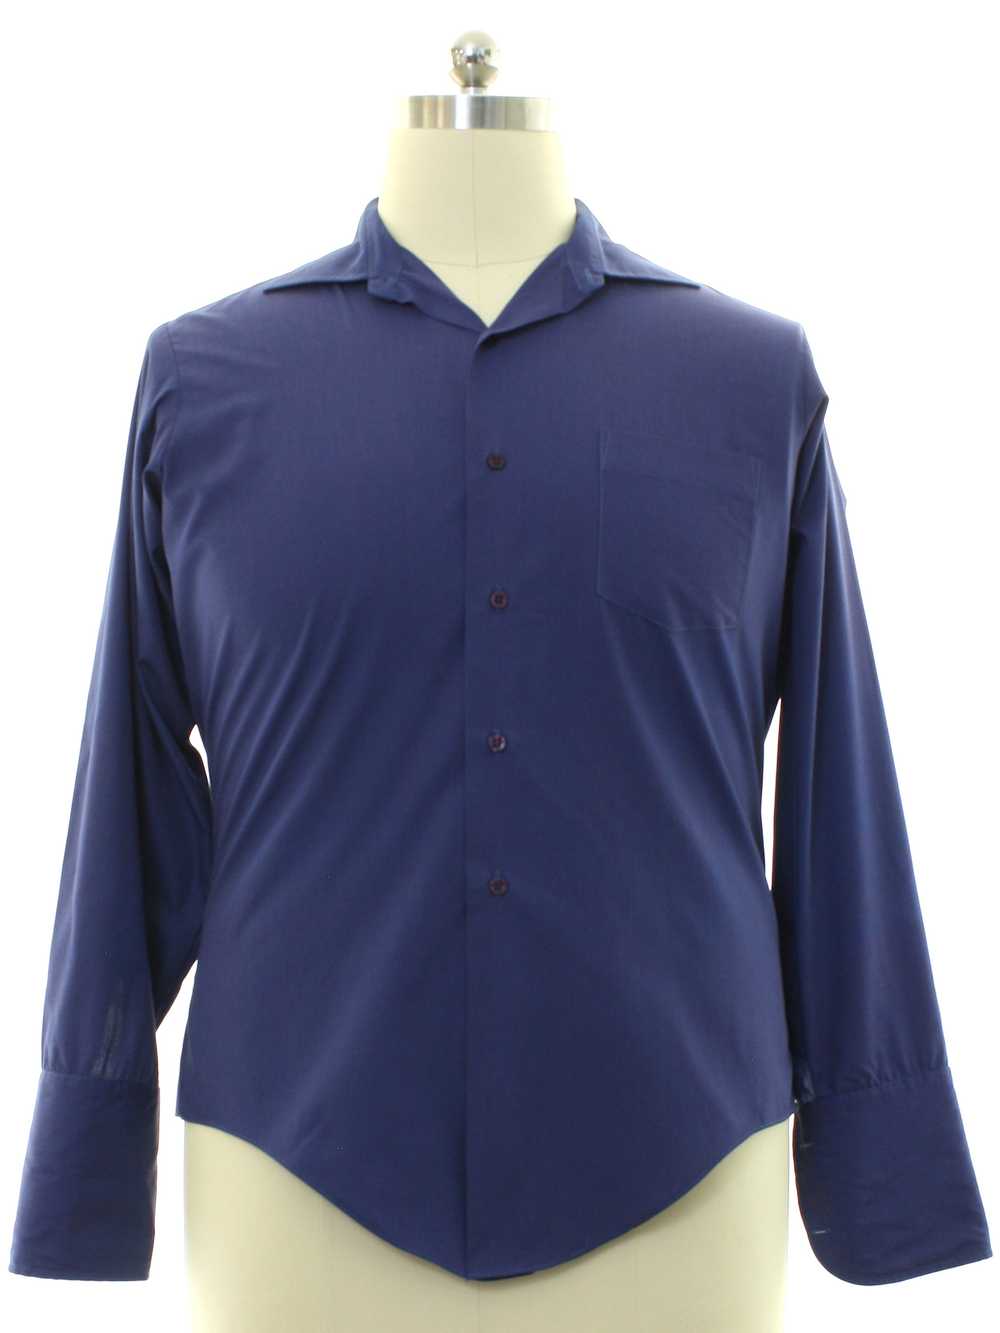 1960's Monte Carlo Mens Mod French Cuff Shirt - image 1